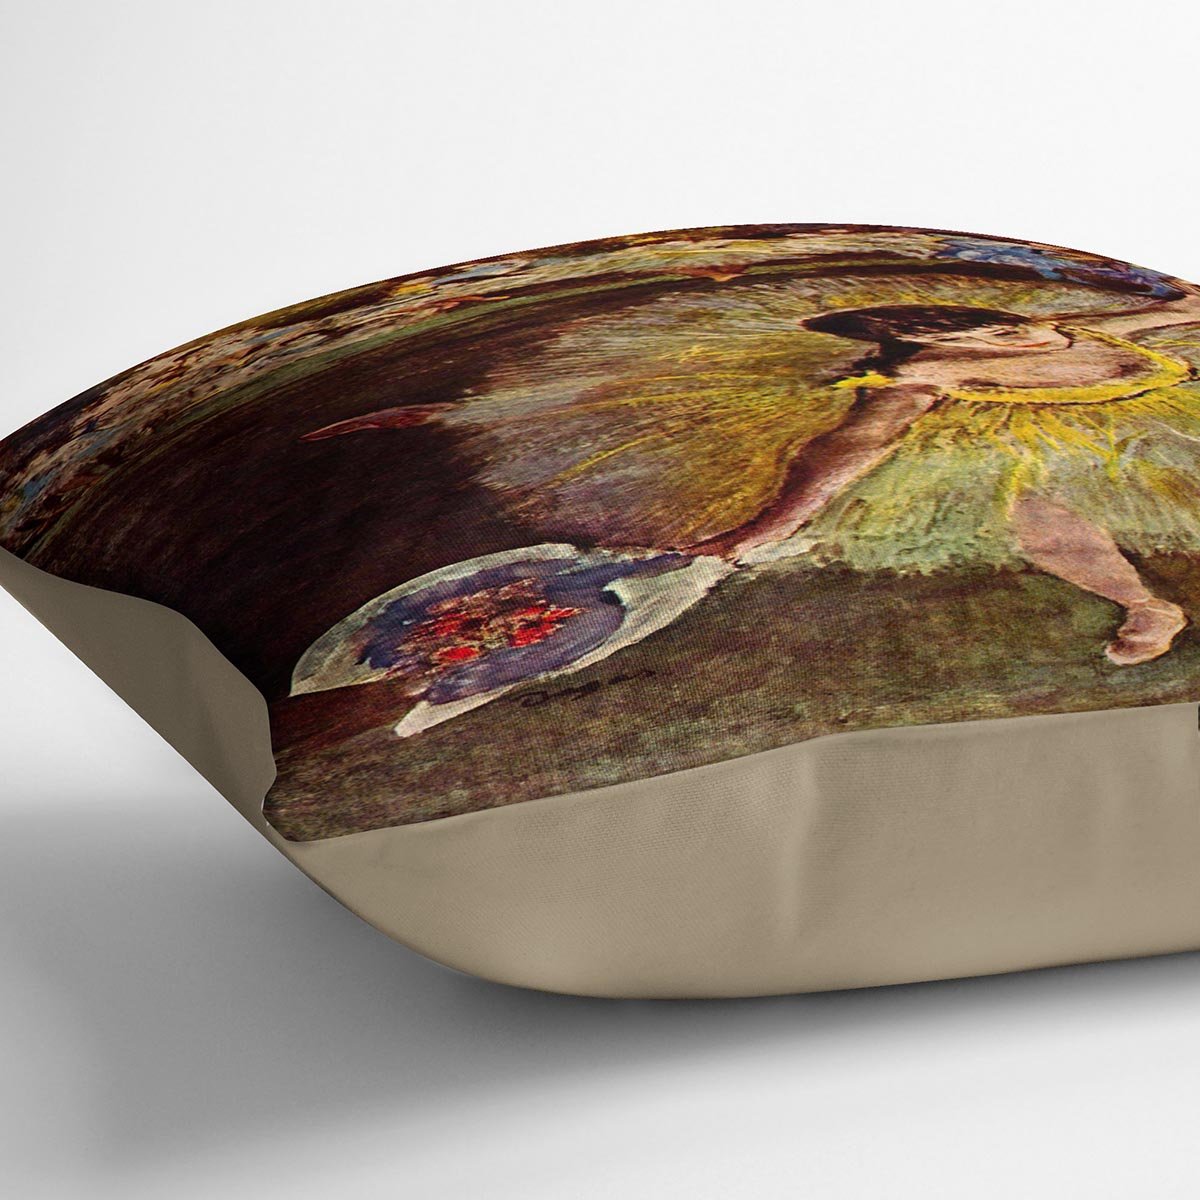 End of the arabesque by Degas Cushion